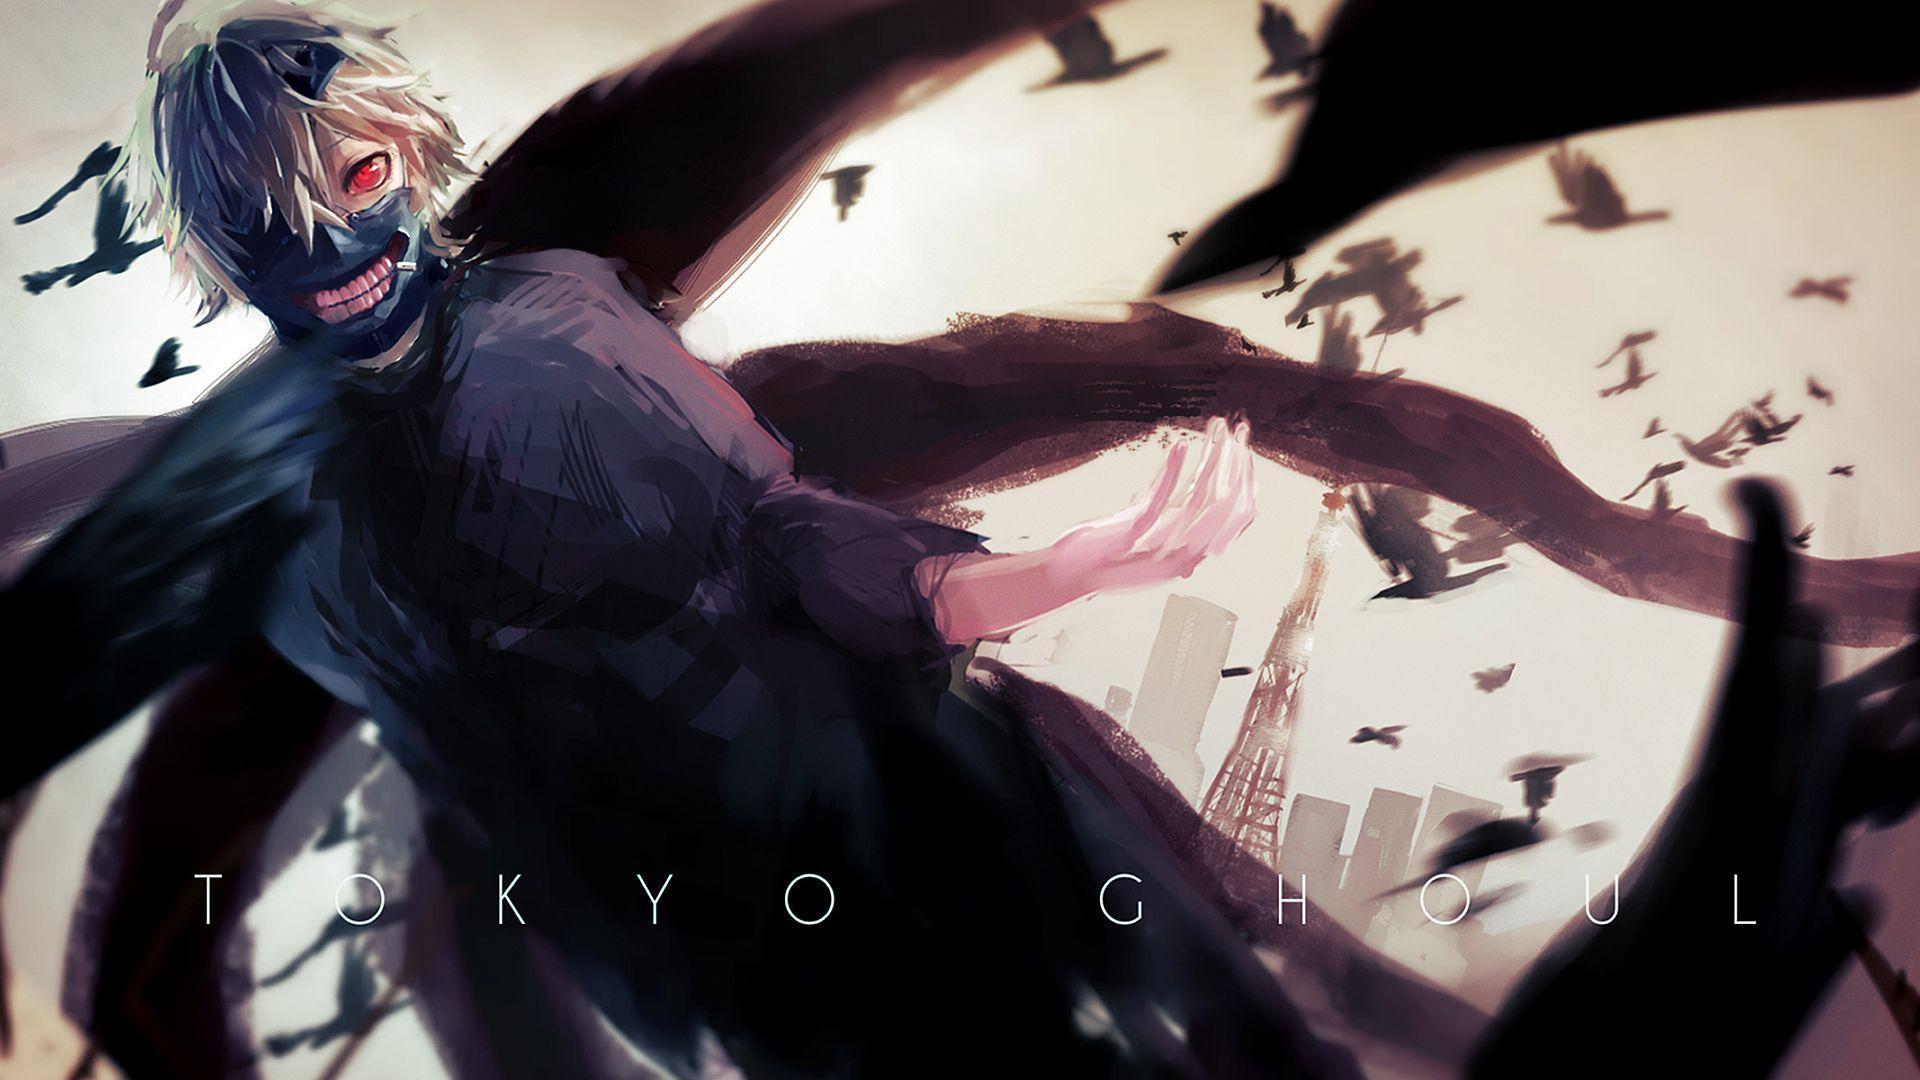 Image for Free Tokyo Ghoul Anime HD Wallpaper 22. Tokyo ghoul